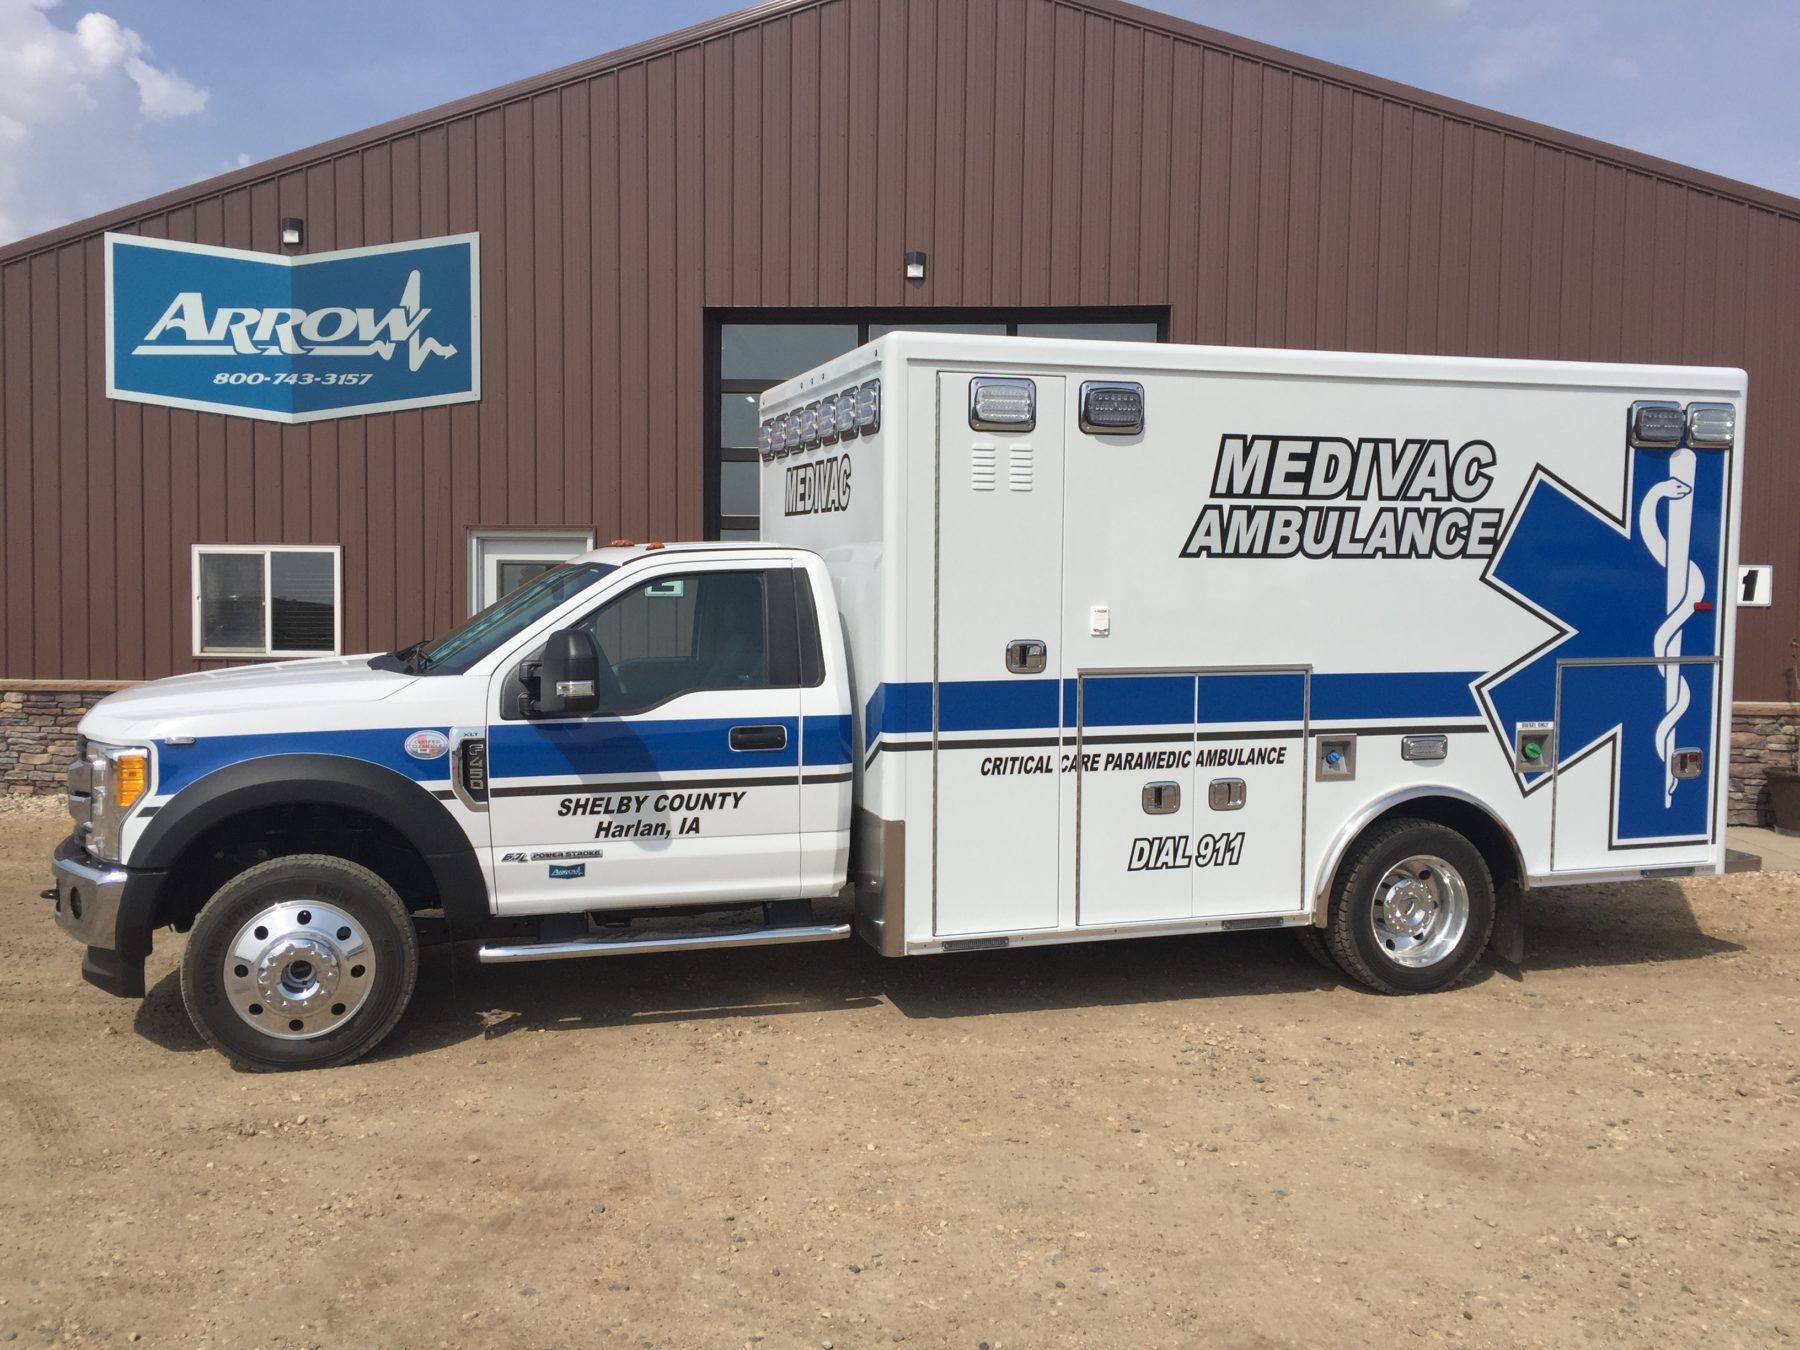 2017 Ford F450 4x4 Heavy Duty Ambulance For Sale – Picture 1